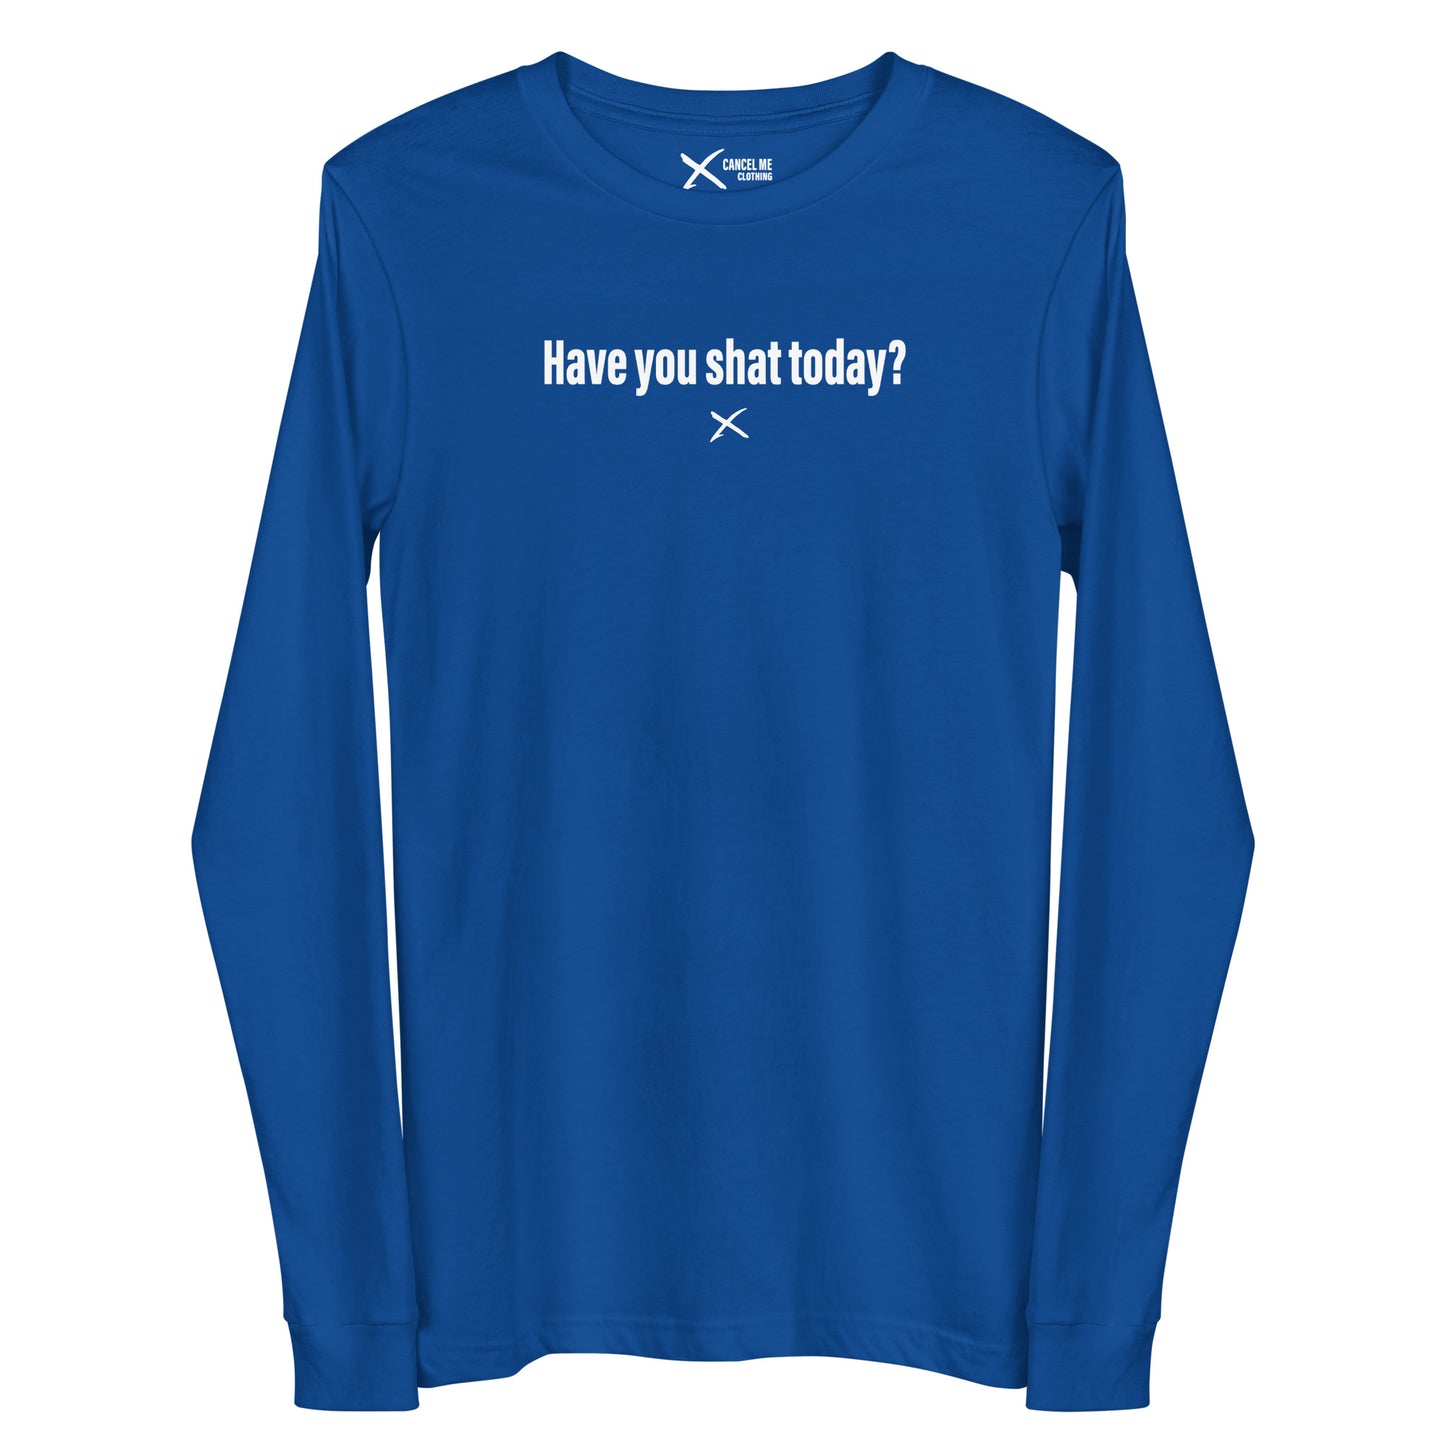 Have you shat today? - Longsleeve